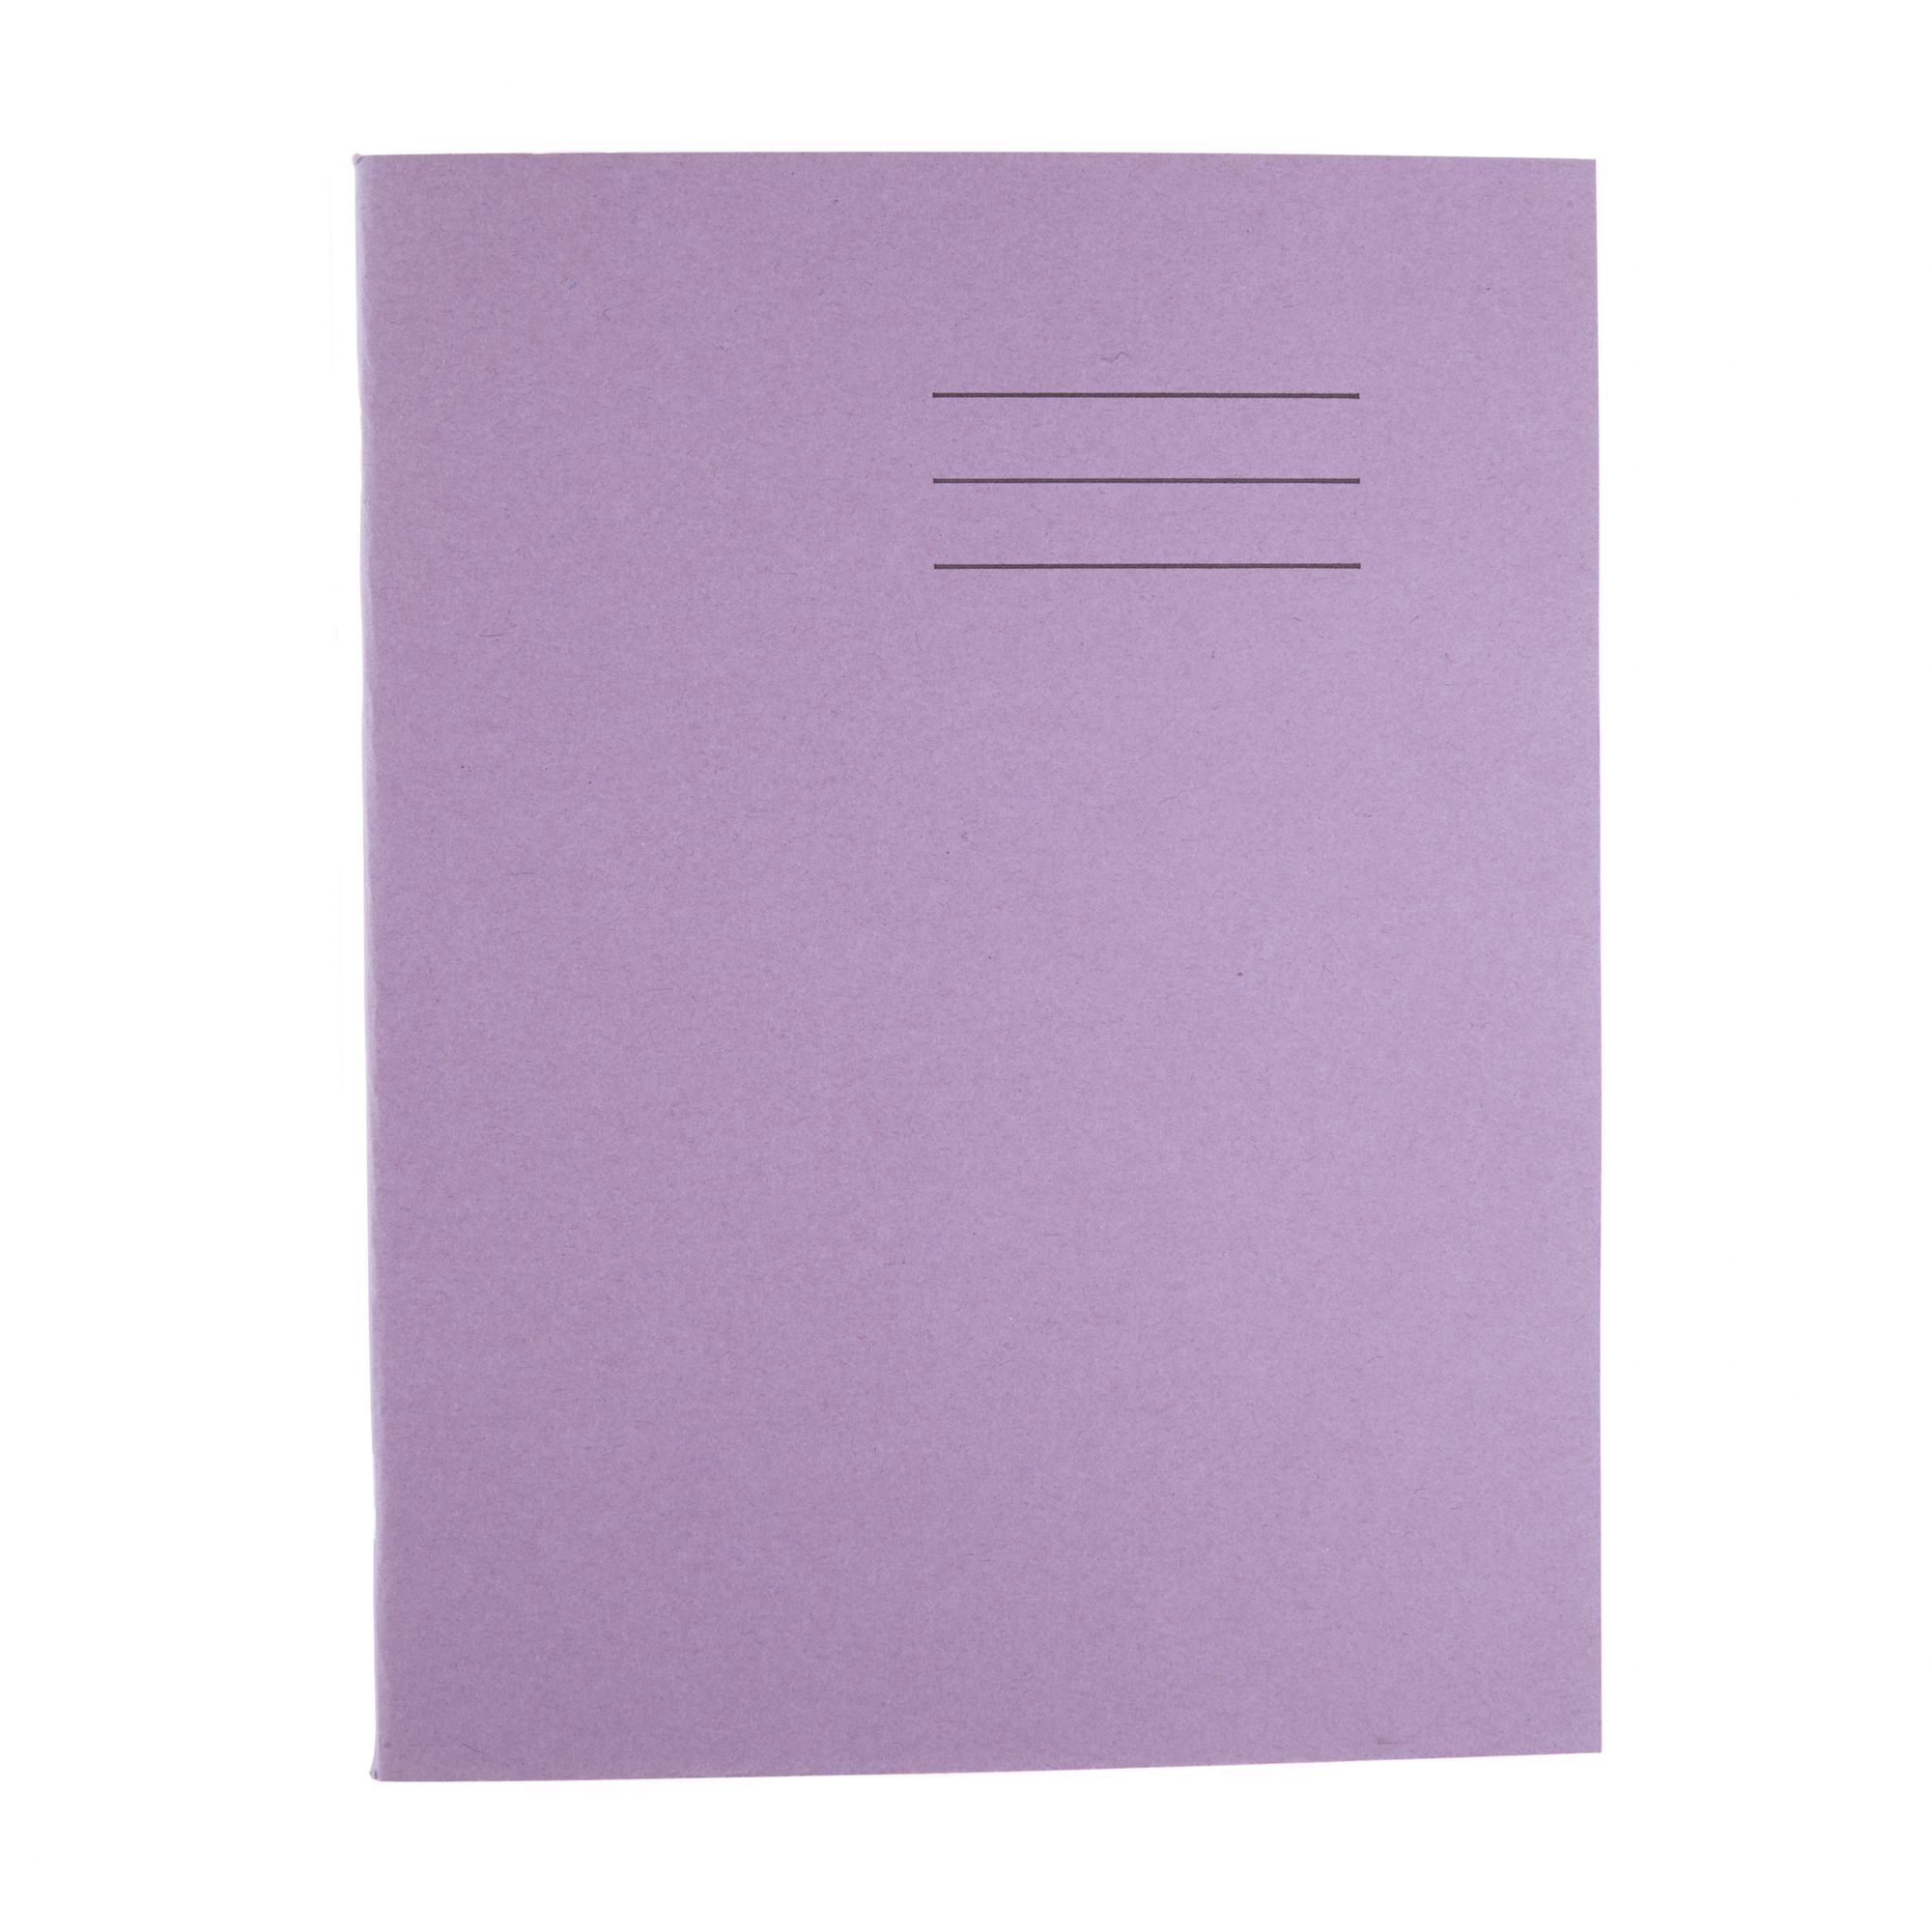 Classmates Purple A4 32 page Top Half Plain/Bottom Half 13mm Ruled Exercise Book - Pack of 100